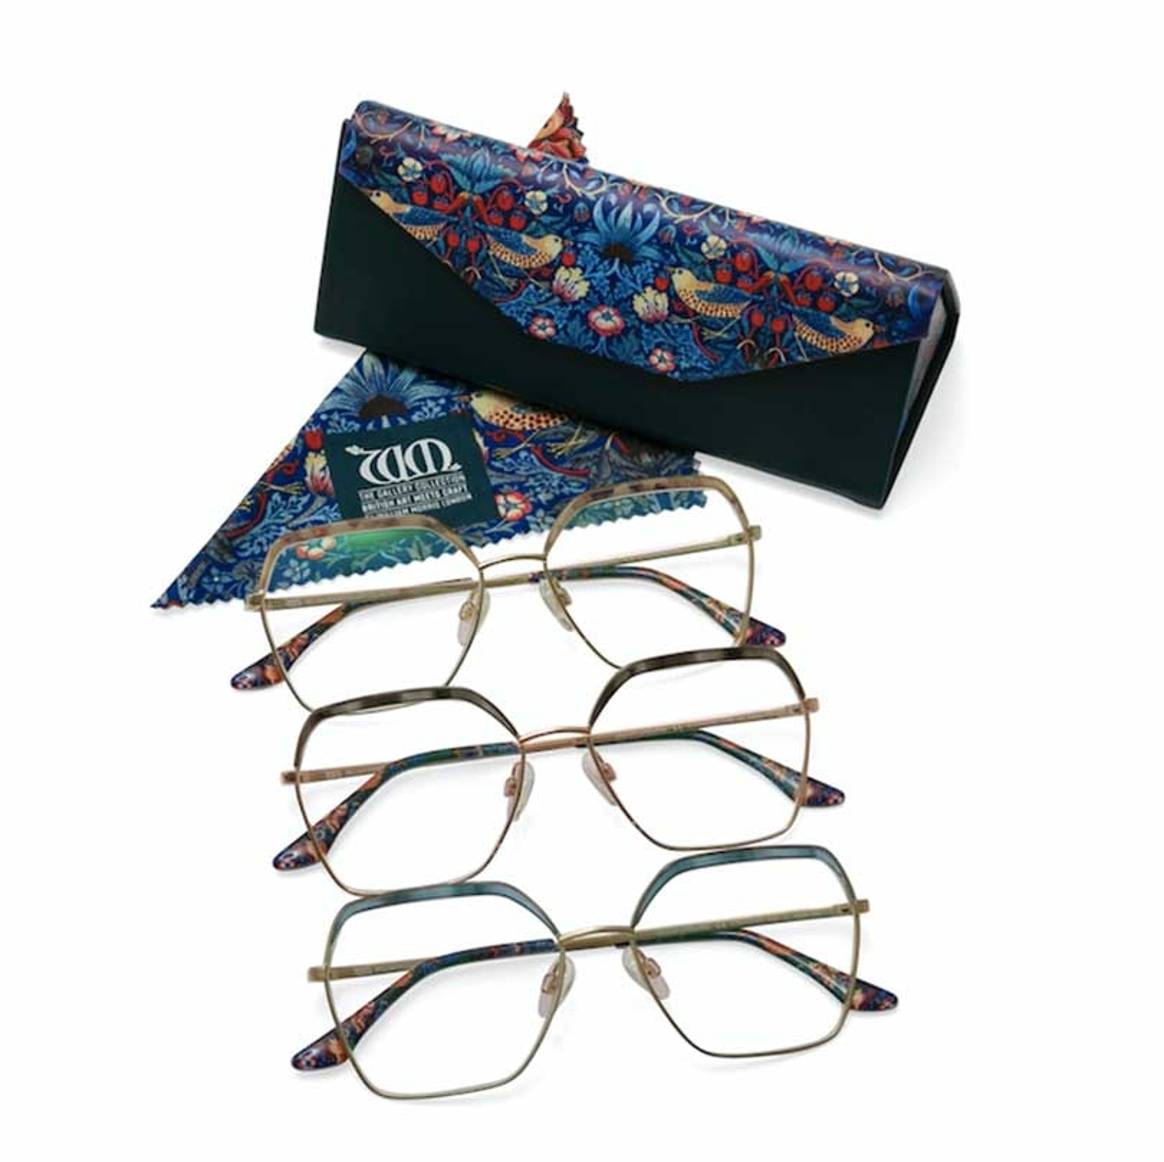 William Morris London launches gallery eyewear collection